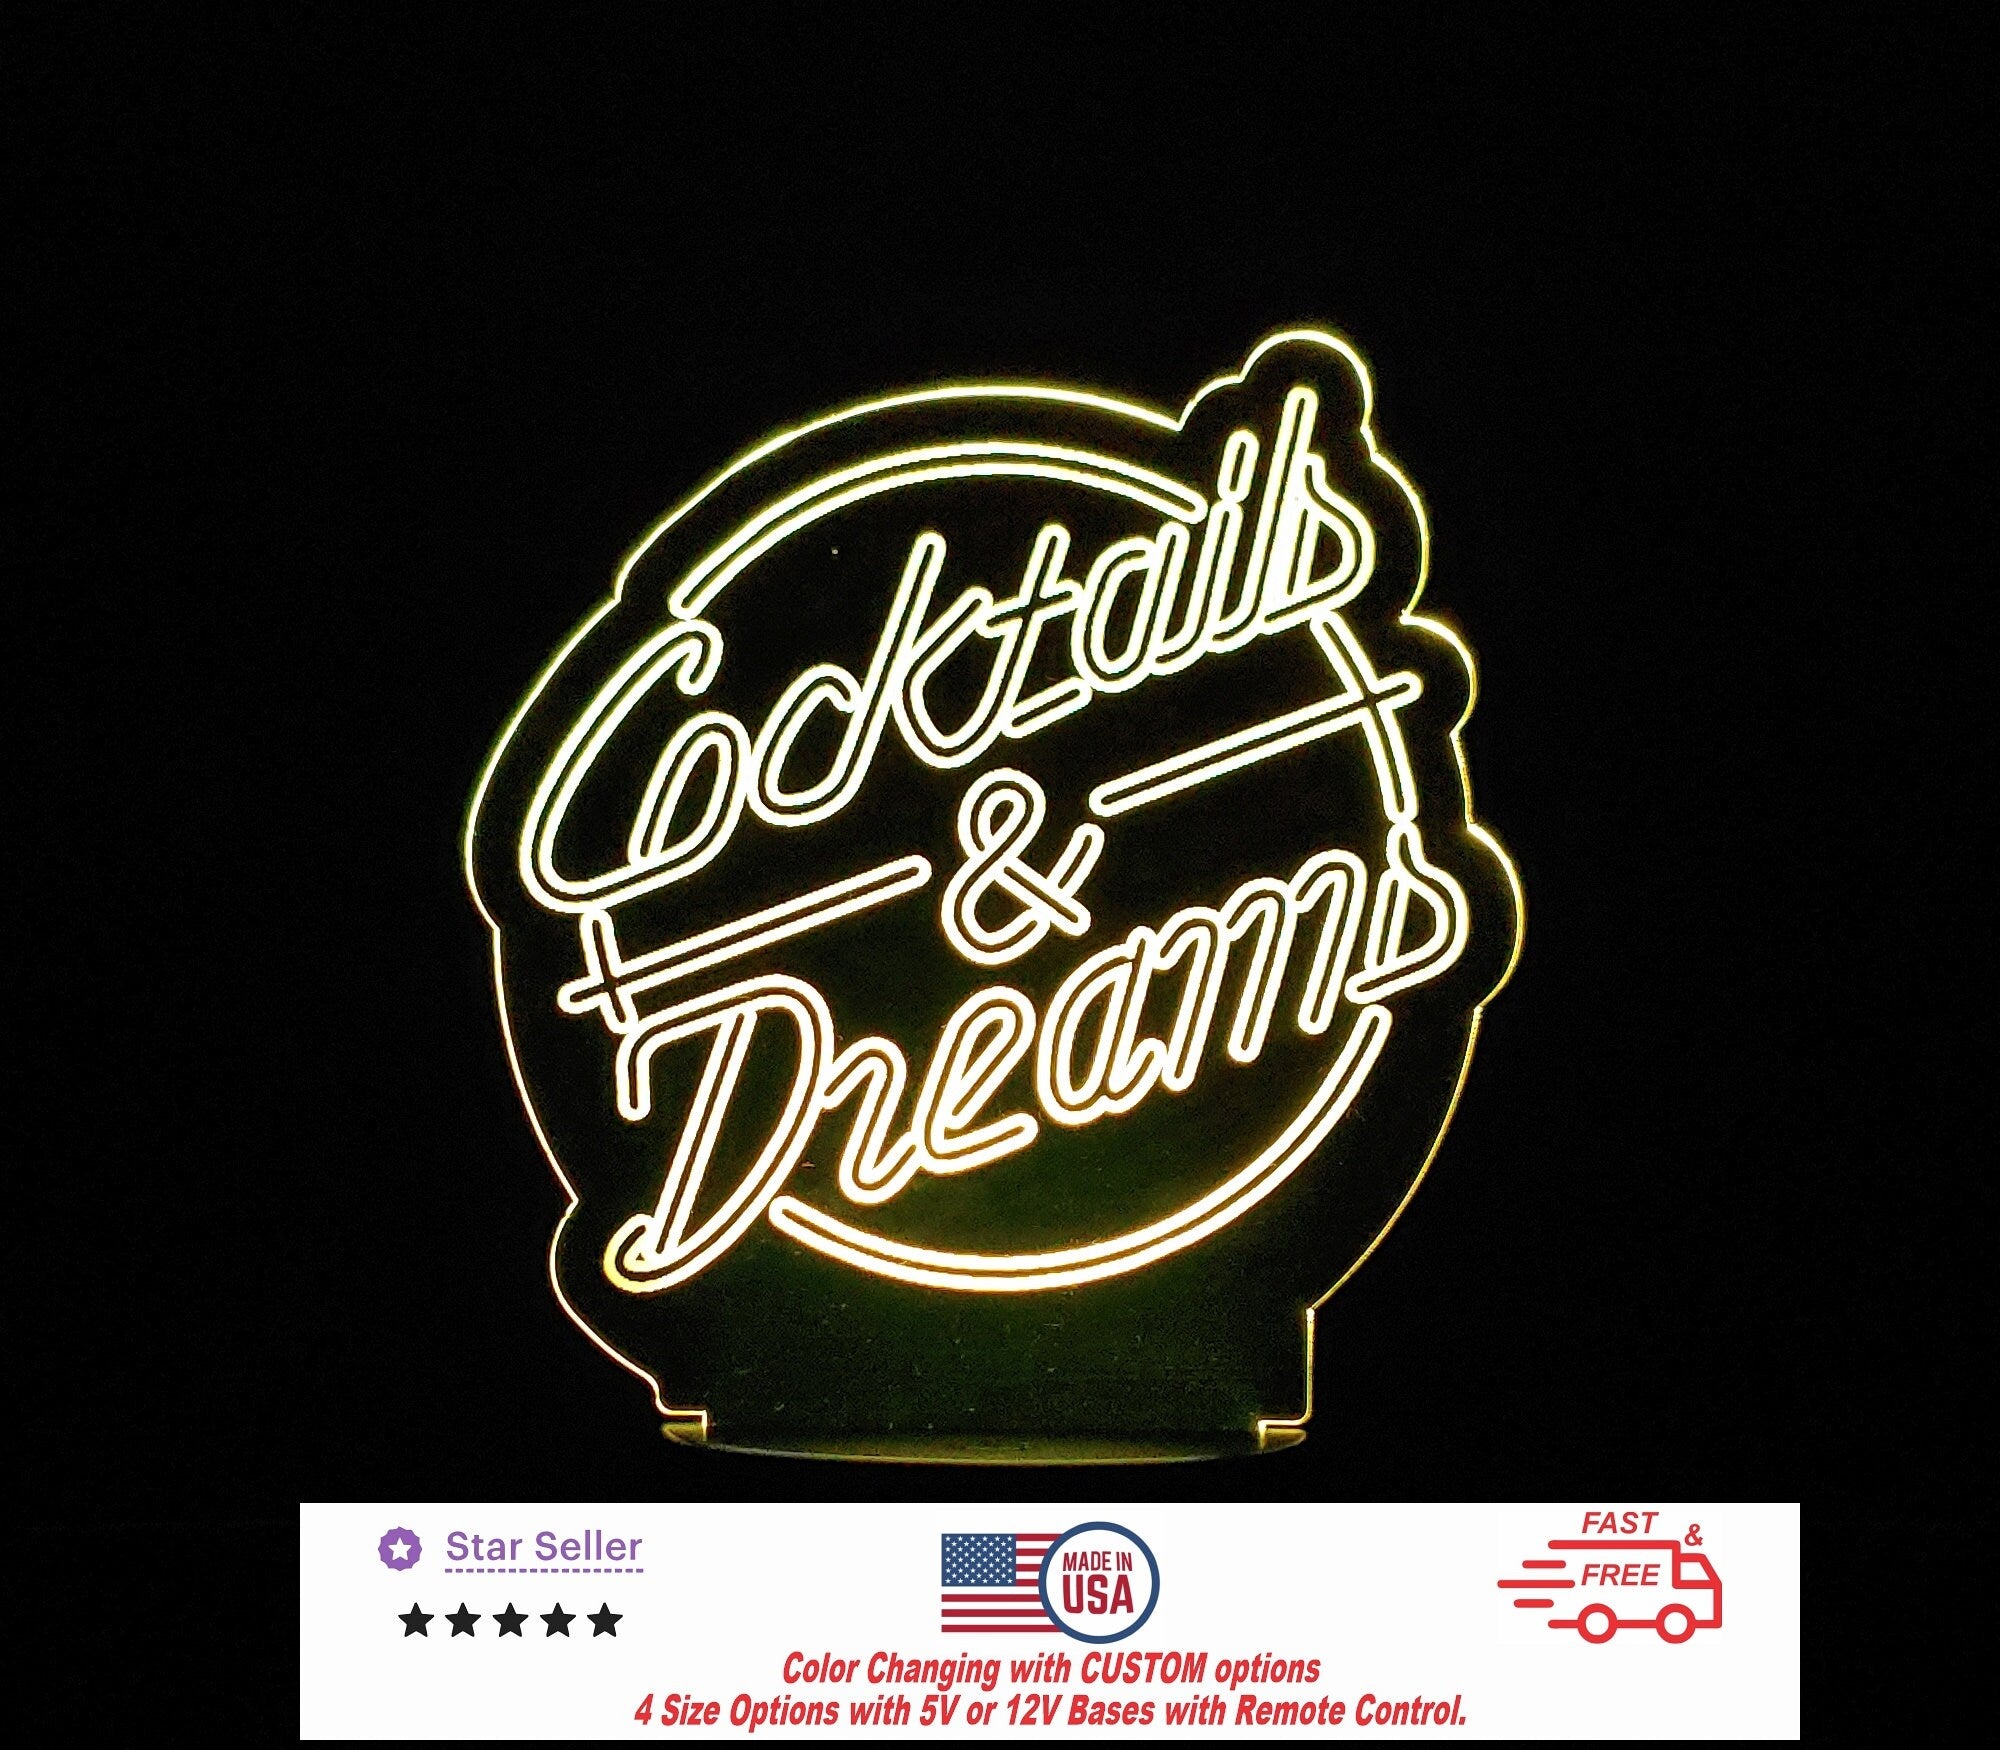 Cocktails and Dreams Bar LED Personalized Night Light, Custom Neon Bar Sign - Cocktail & Dreams Sign - 4 Sizes Free Shipping Made in USA